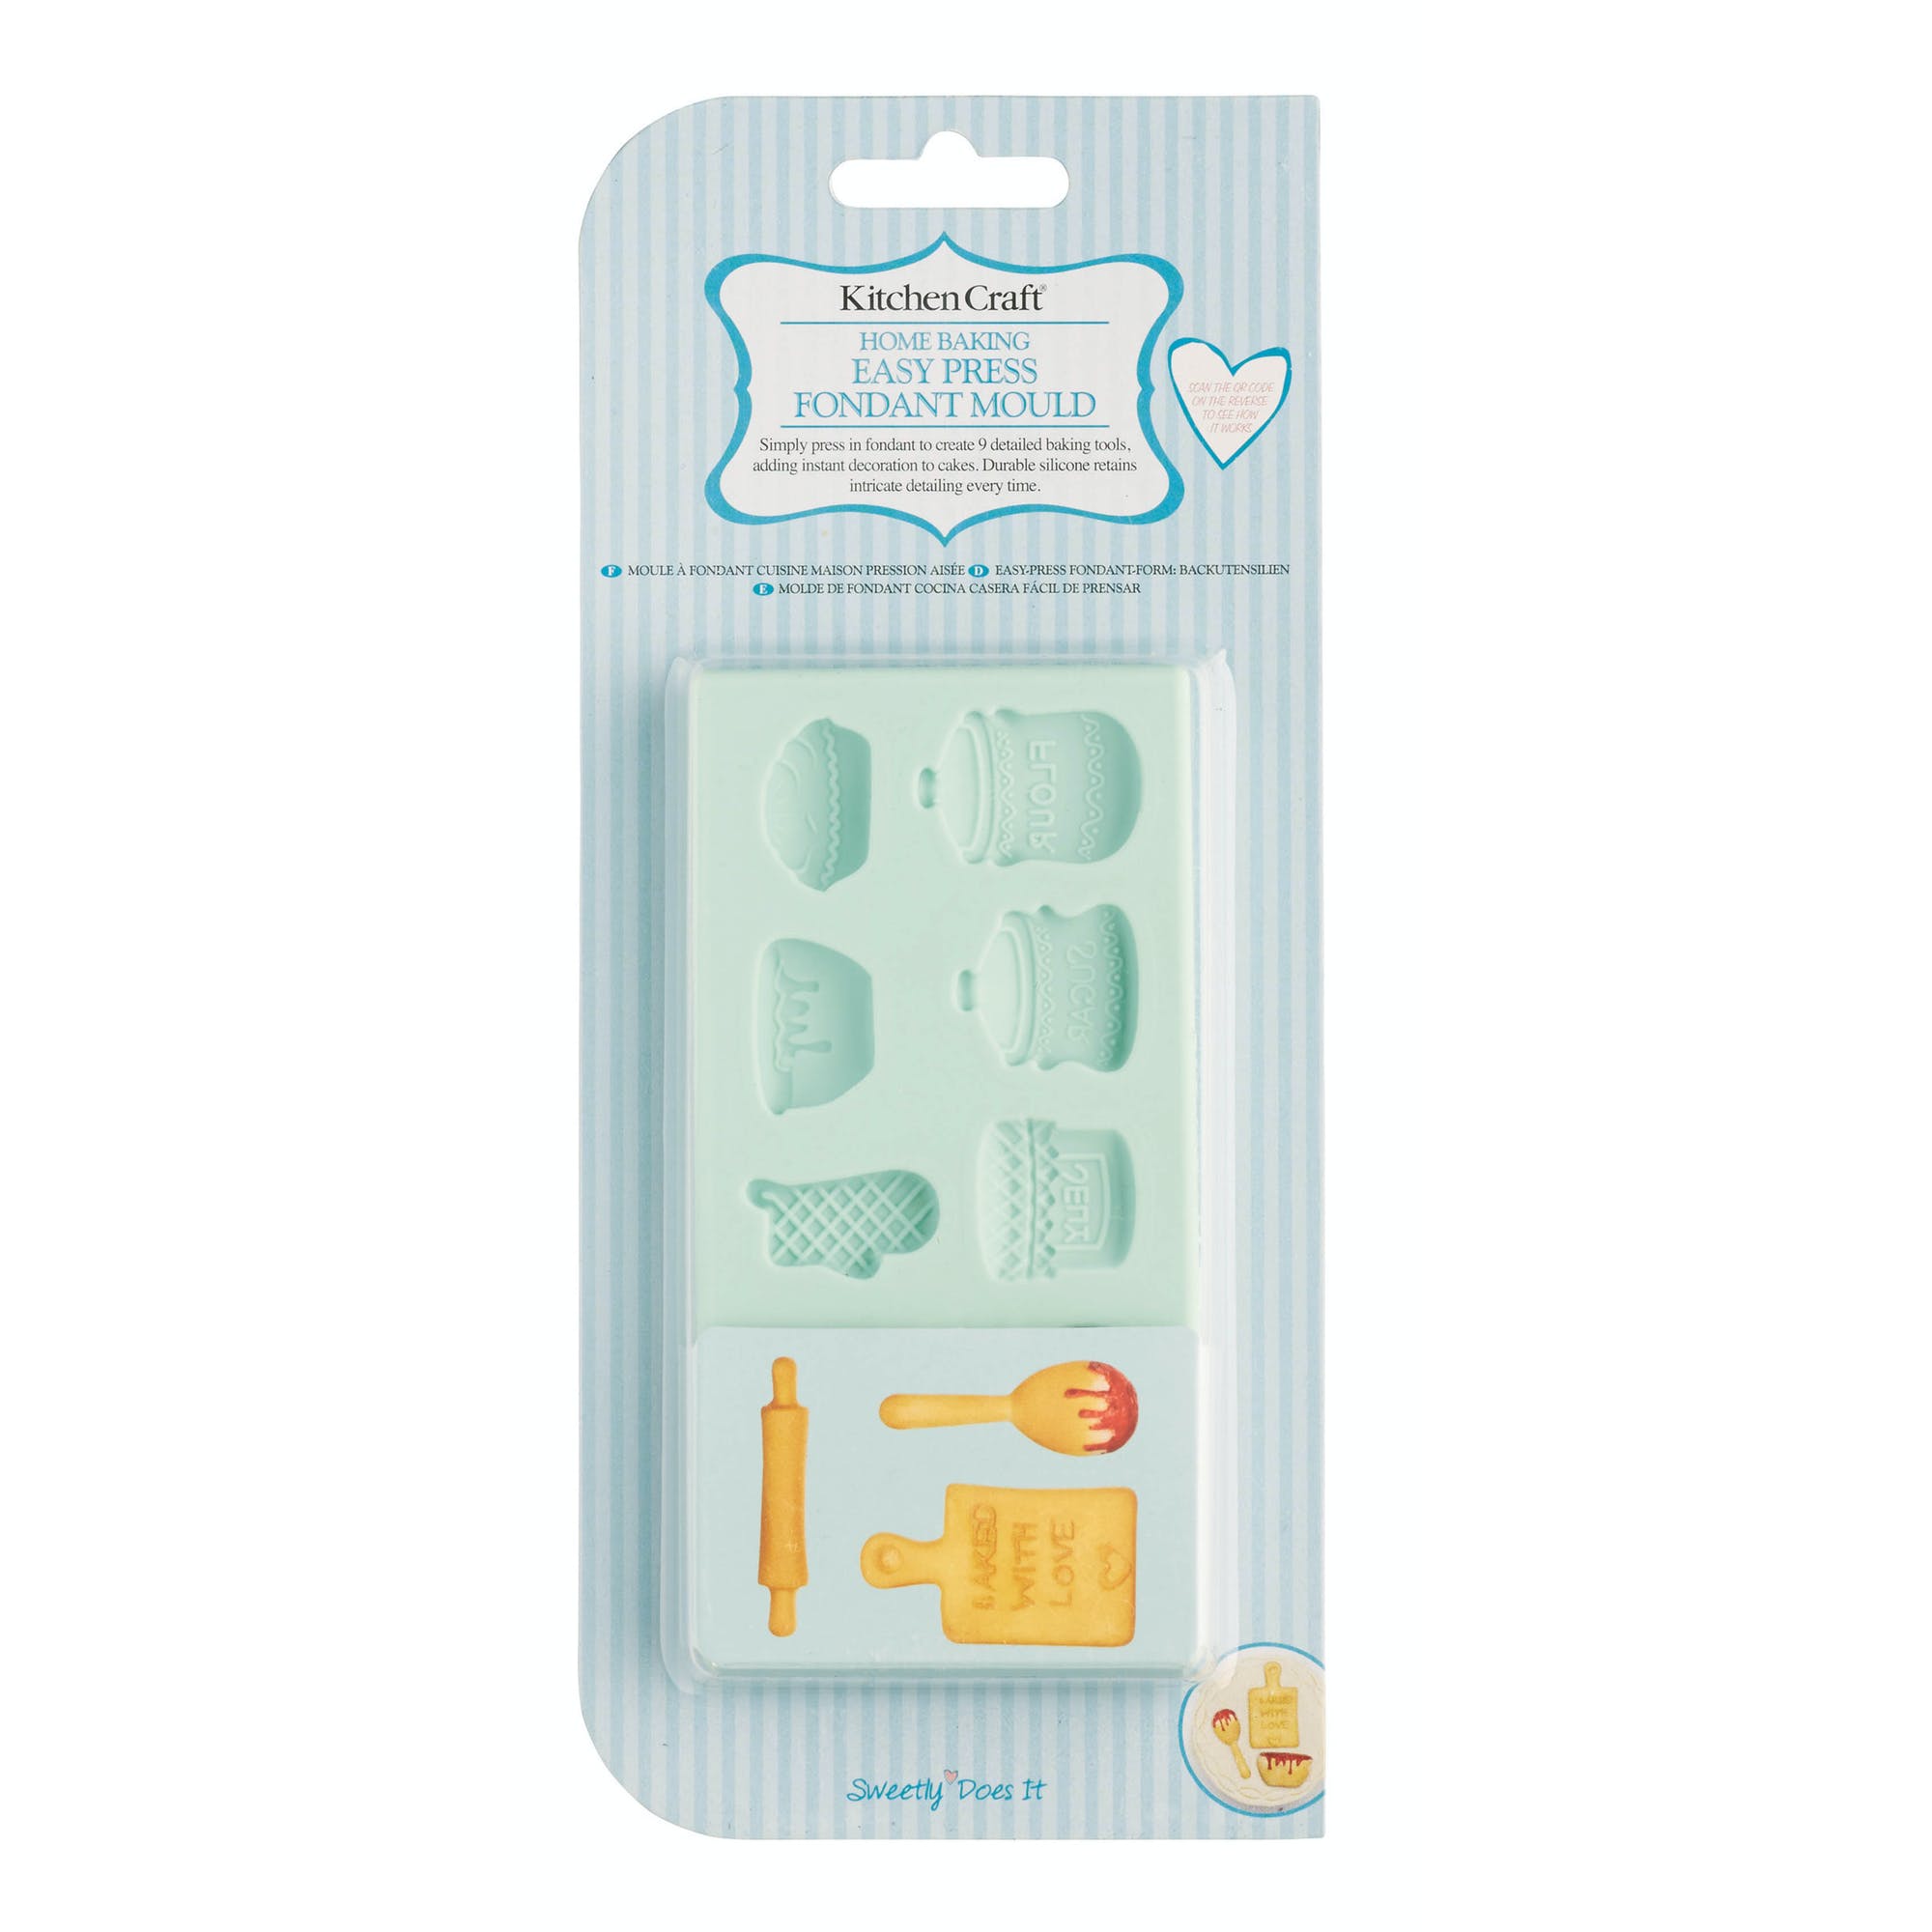 Sweetly Does It Home Baking Silicone Fondant Mould - The Cooks Cupboard Ltd